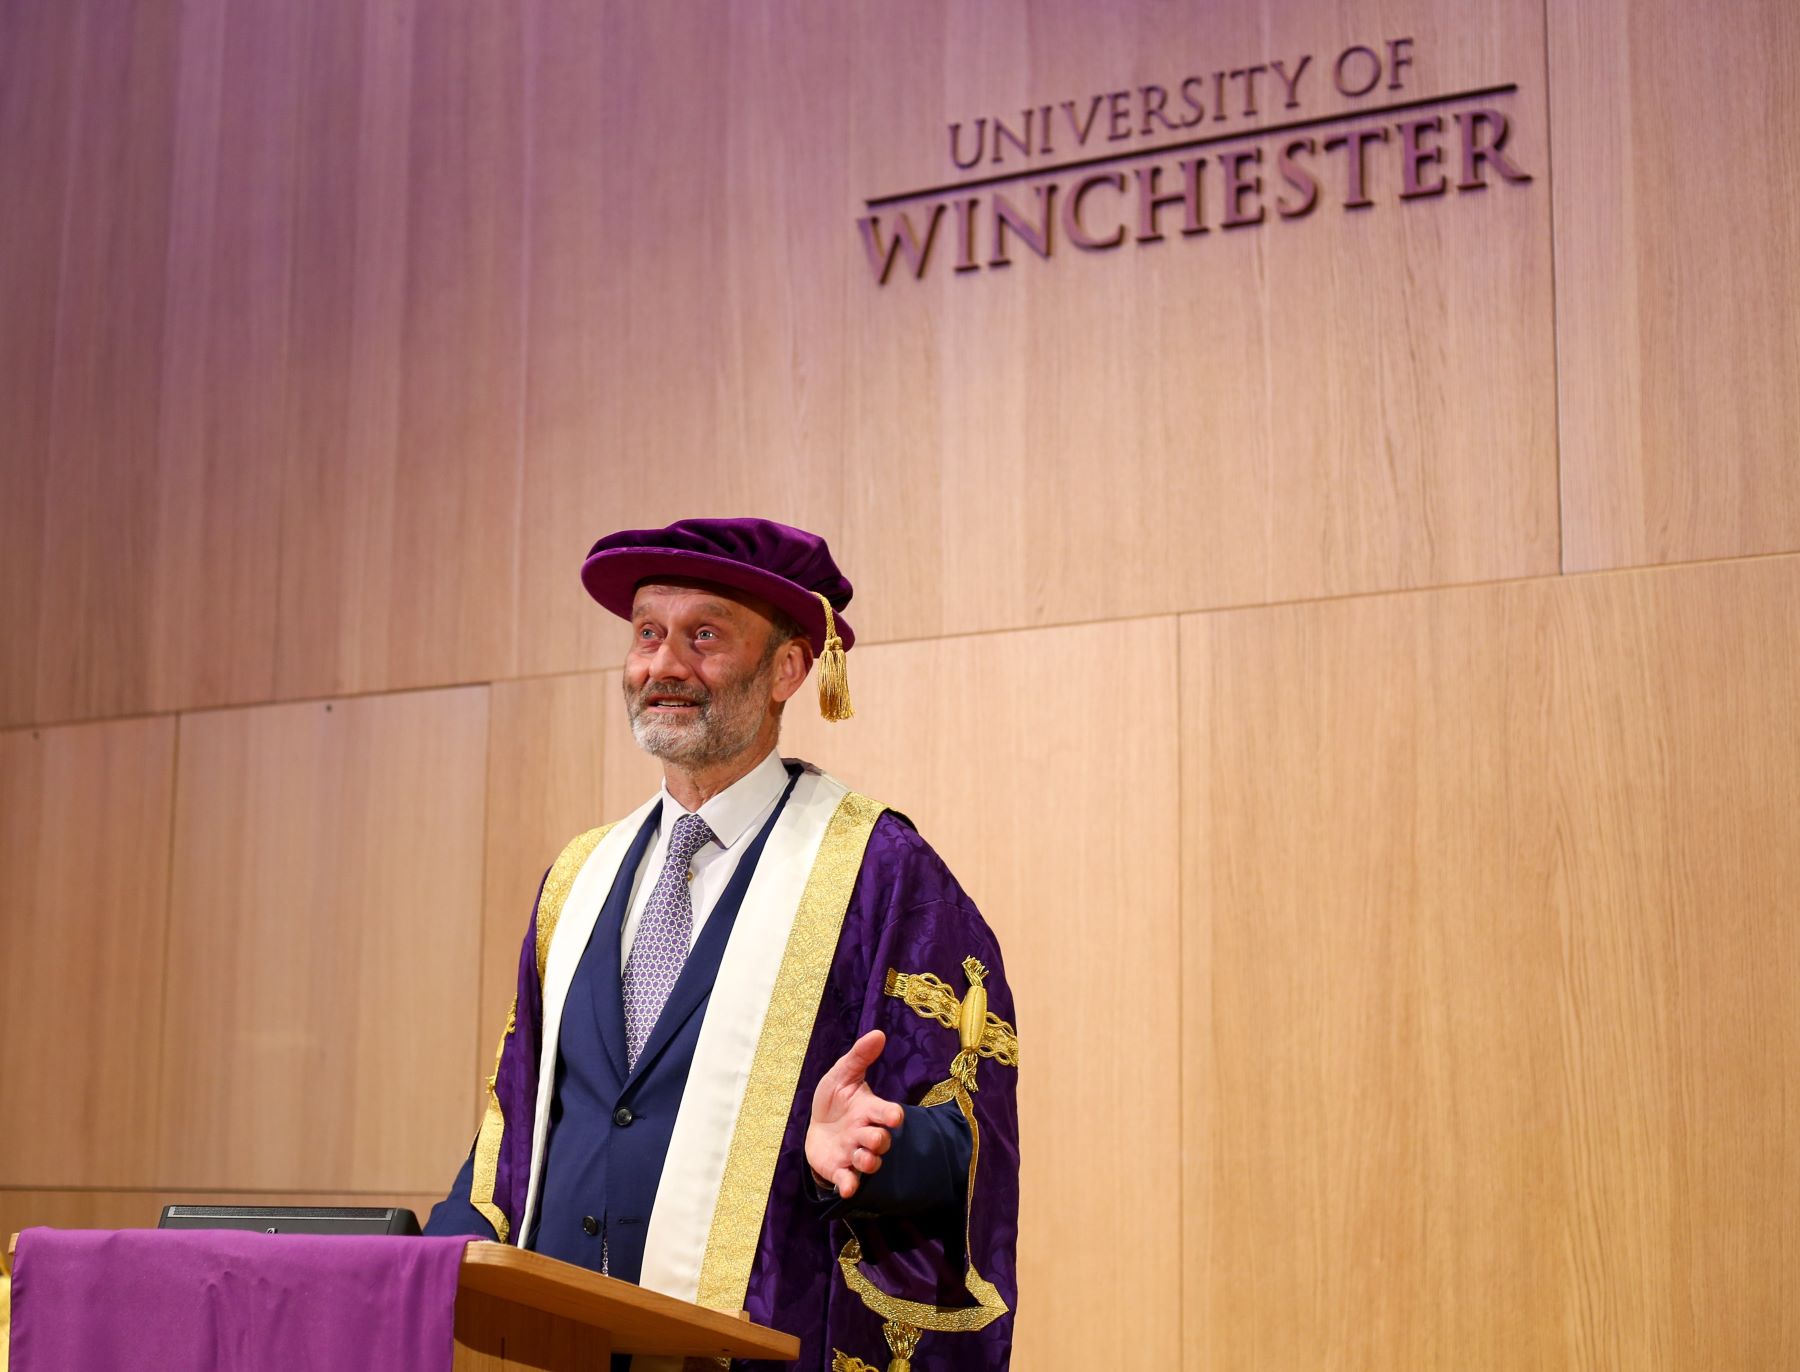 man in purple robes with University of Winchester sign in background